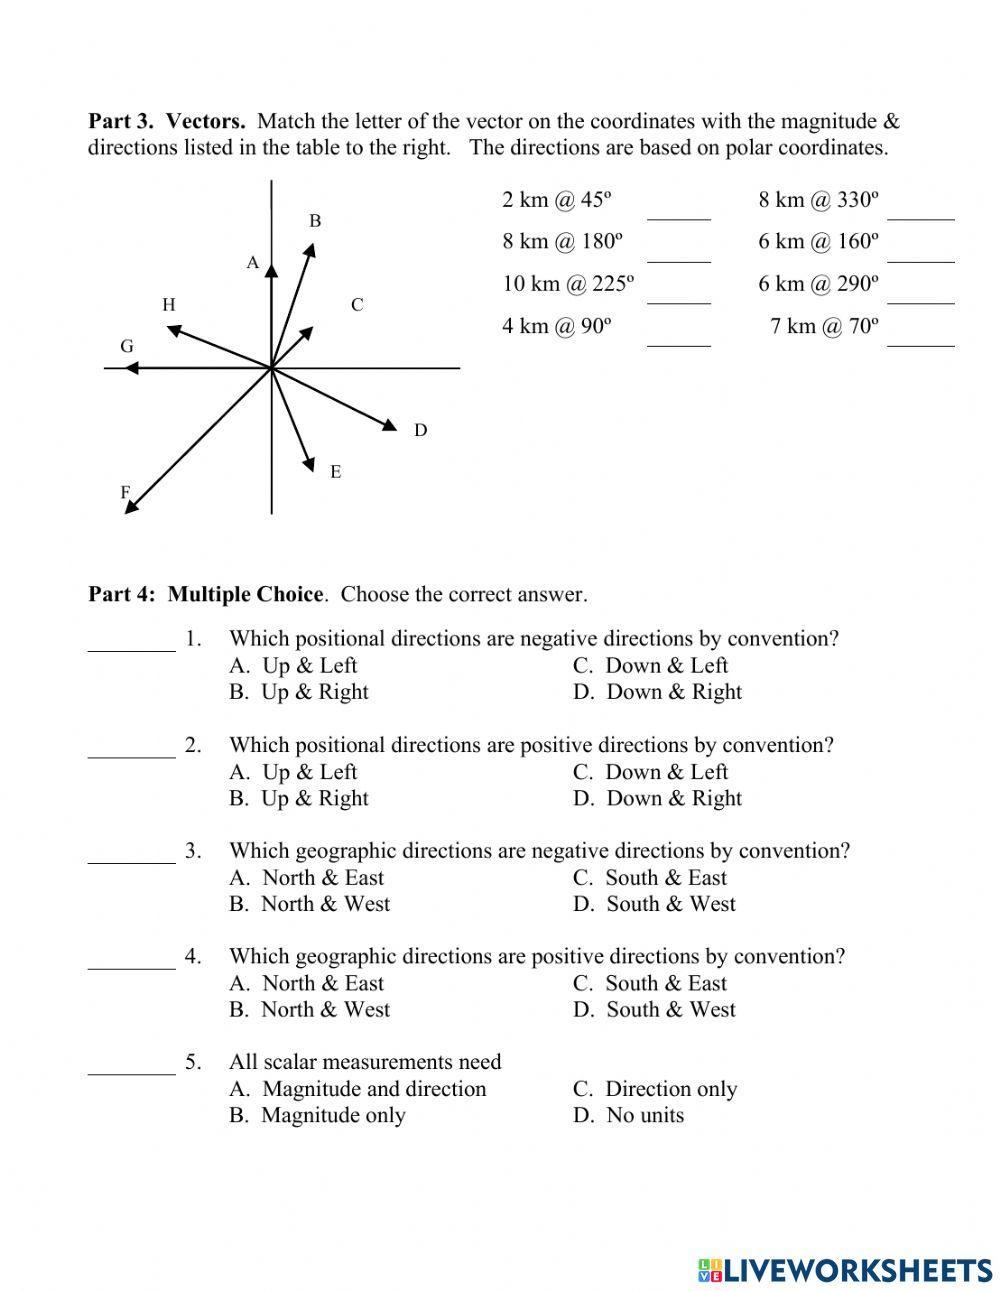 Sp2023 Vectors and Scalars Review